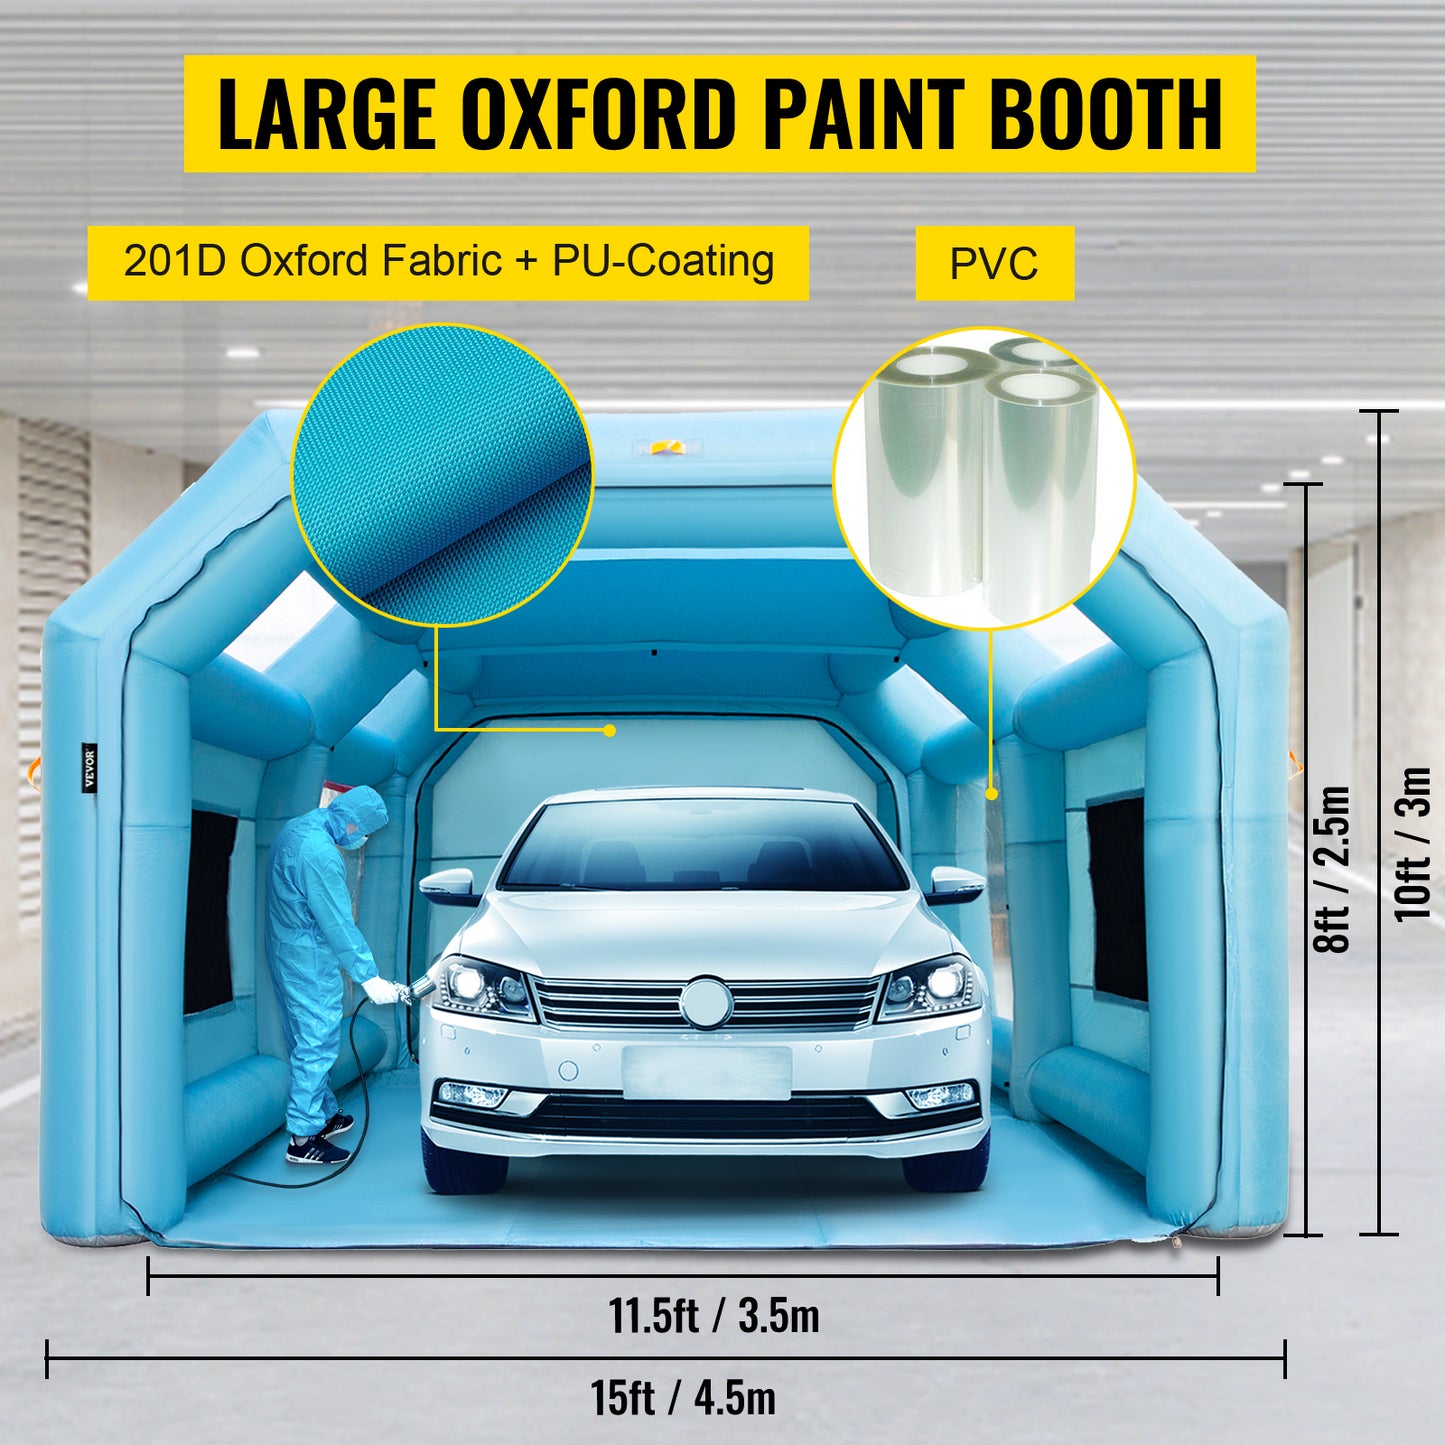 VEVOR Inflatable Paint Booth 8.5x4.6x3 m Carport Car Spray Tent W/ 2 Blowers Auto Shelter Room Garage